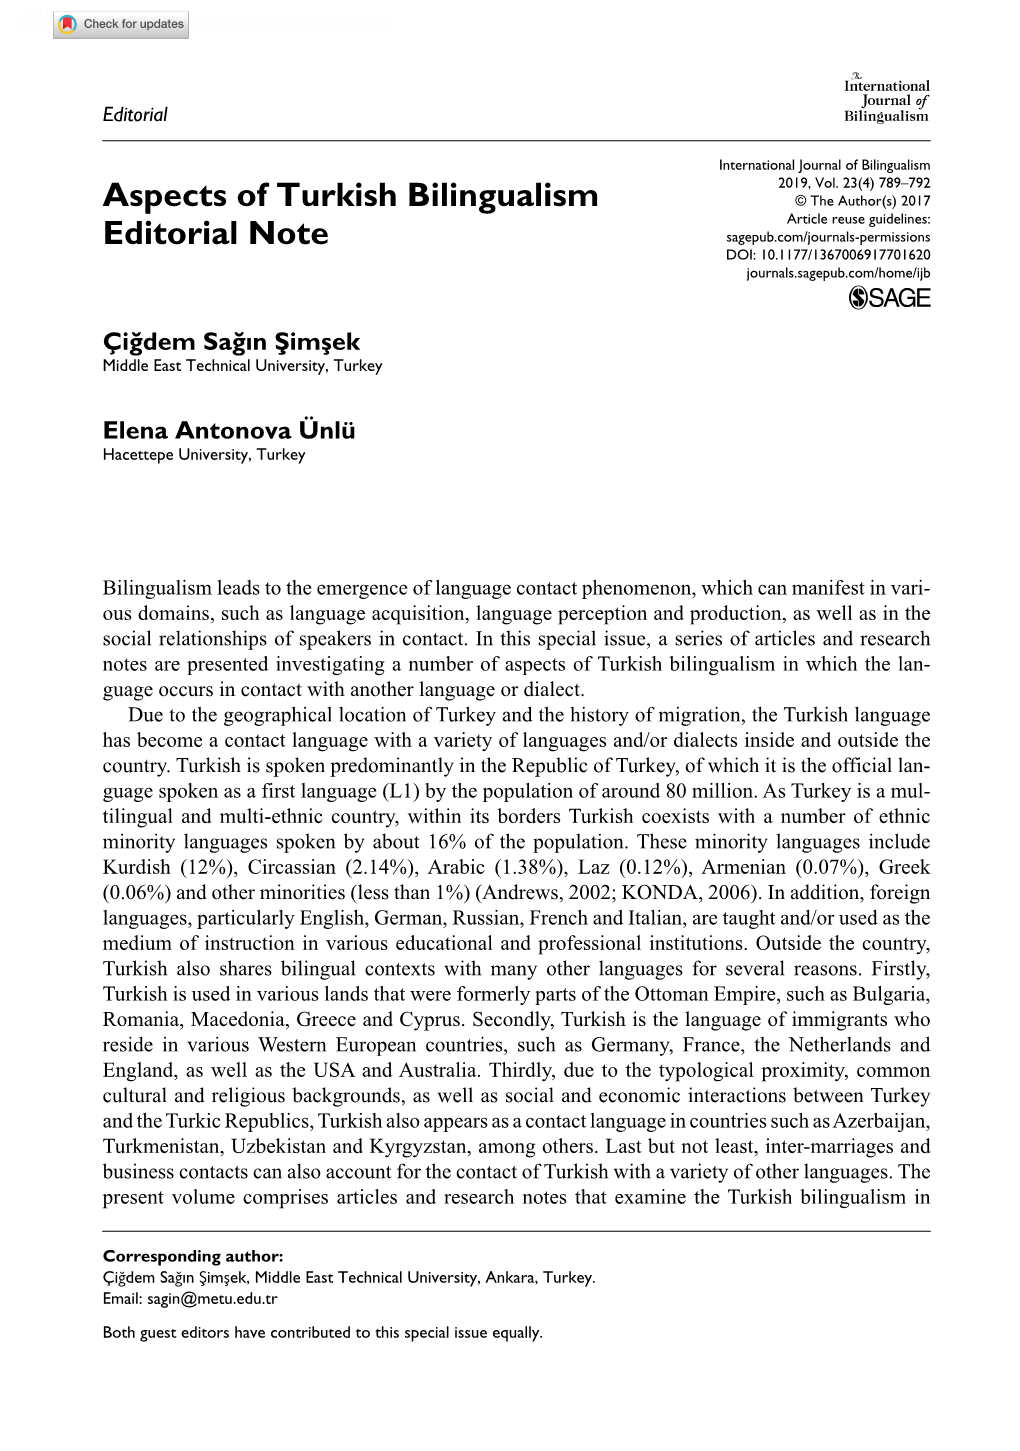 Aspects of Turkish Bilingualism Editorial Note